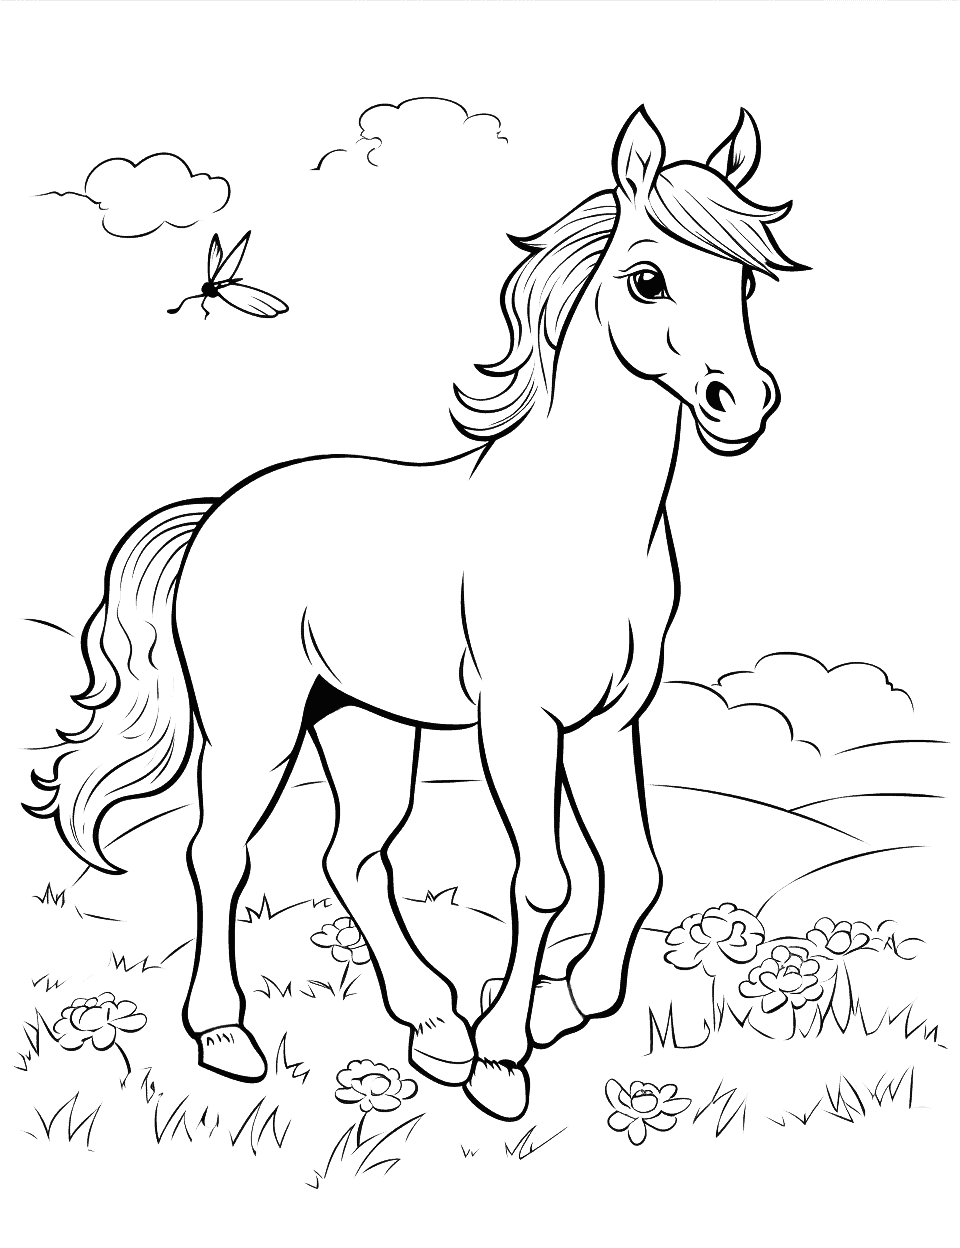 Cute Foal Playing Coloring Page - A cute foal playing with butterflies in a sunny meadow.